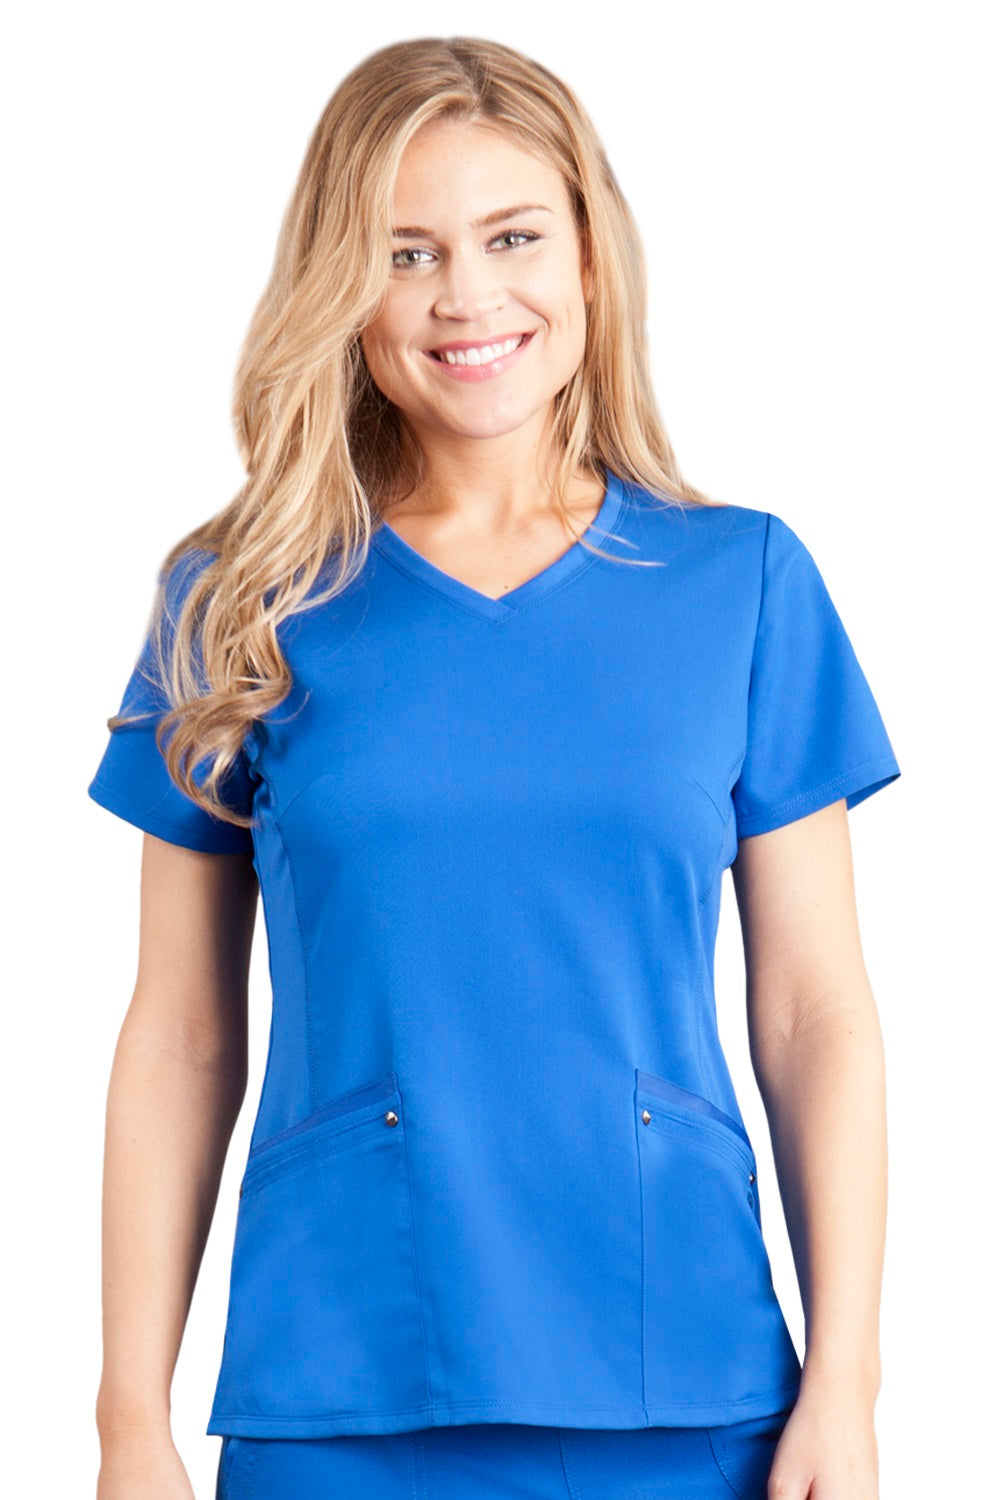 Healing Hands Purple Label Juliet Scrub Top in Royal at Parker's Clothing and Shoes.